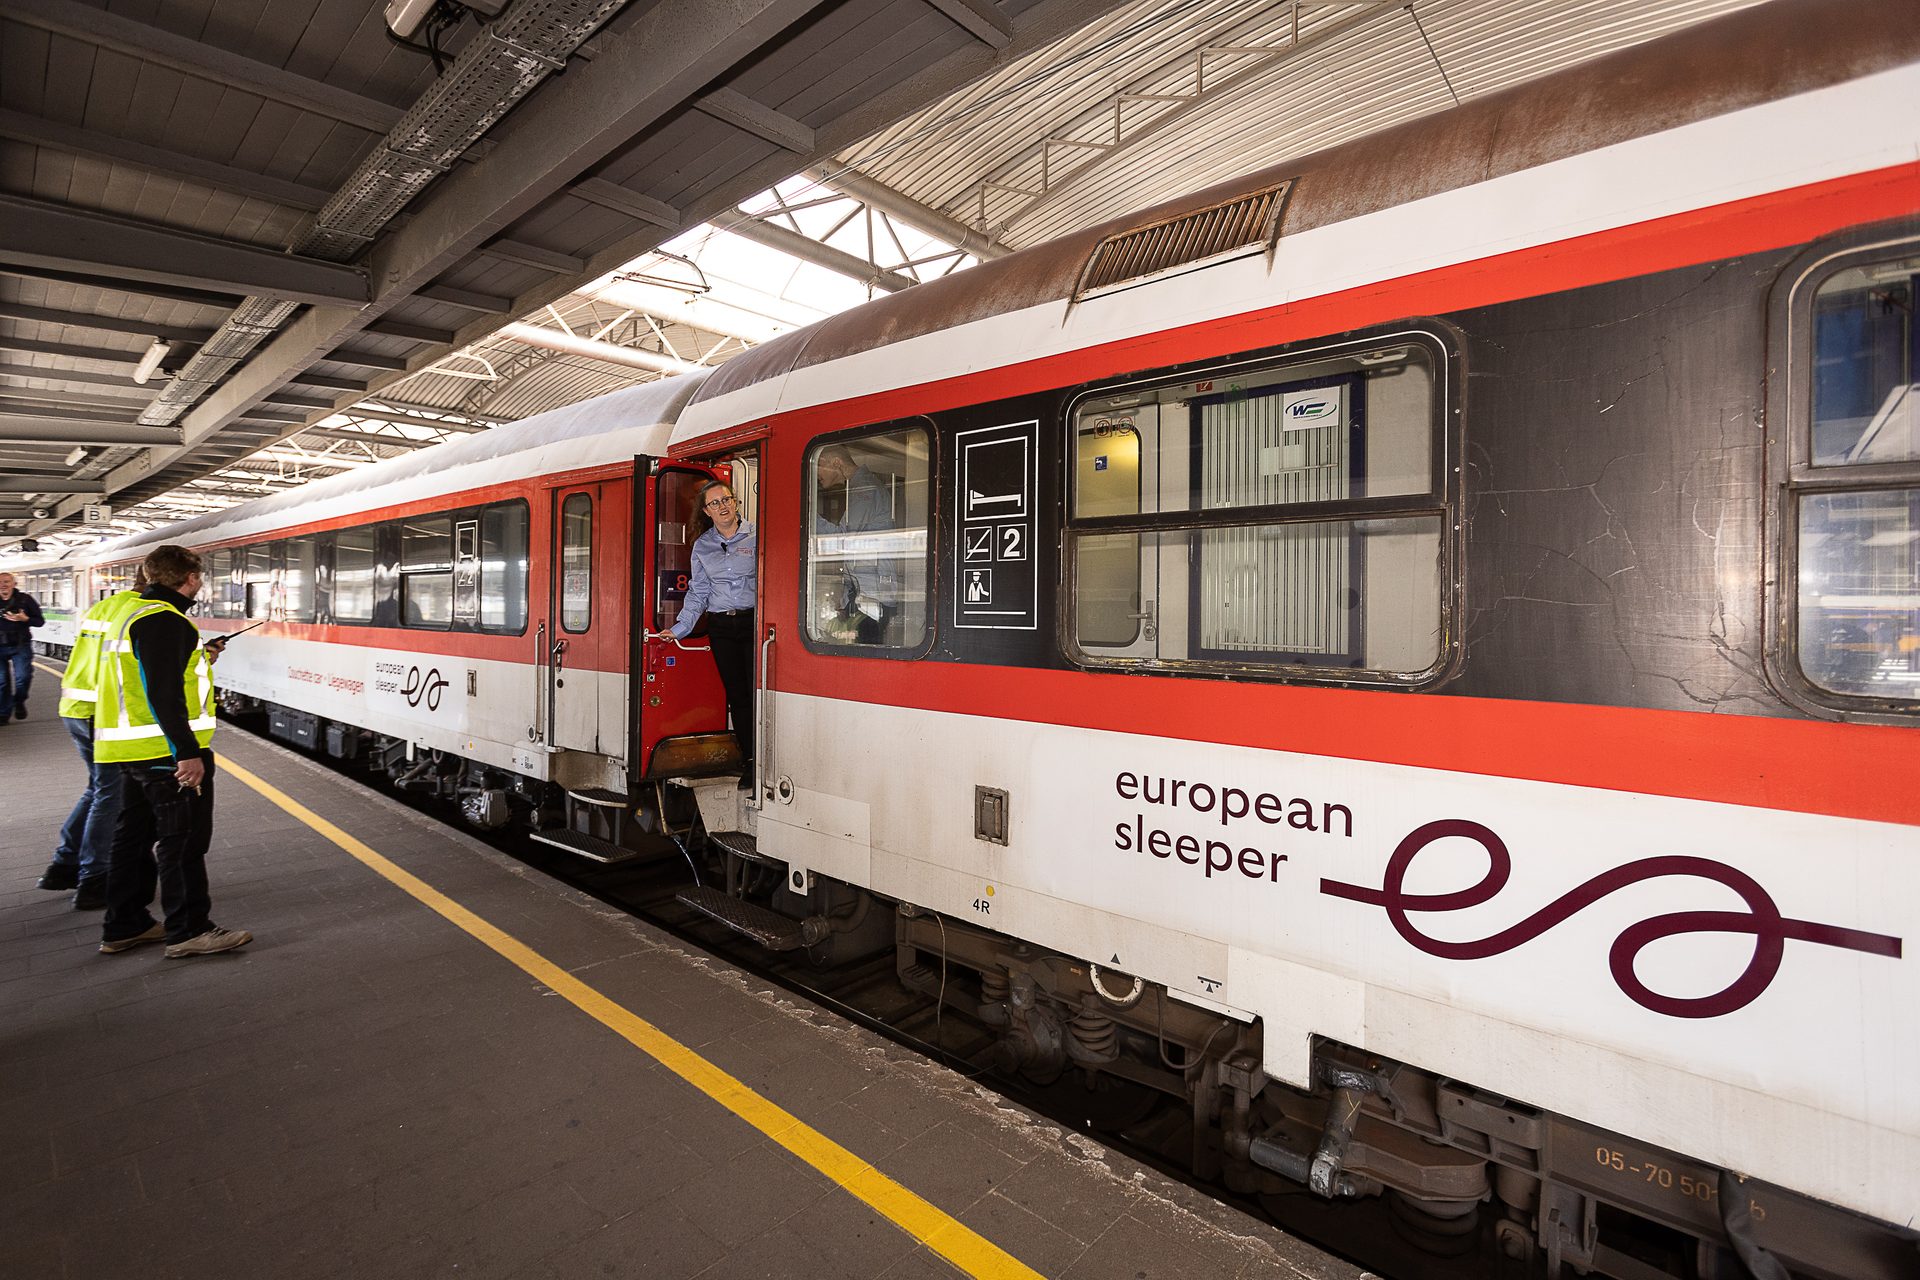 Brussels-Berlin night train review: Niche nostalgia or rail for the future?